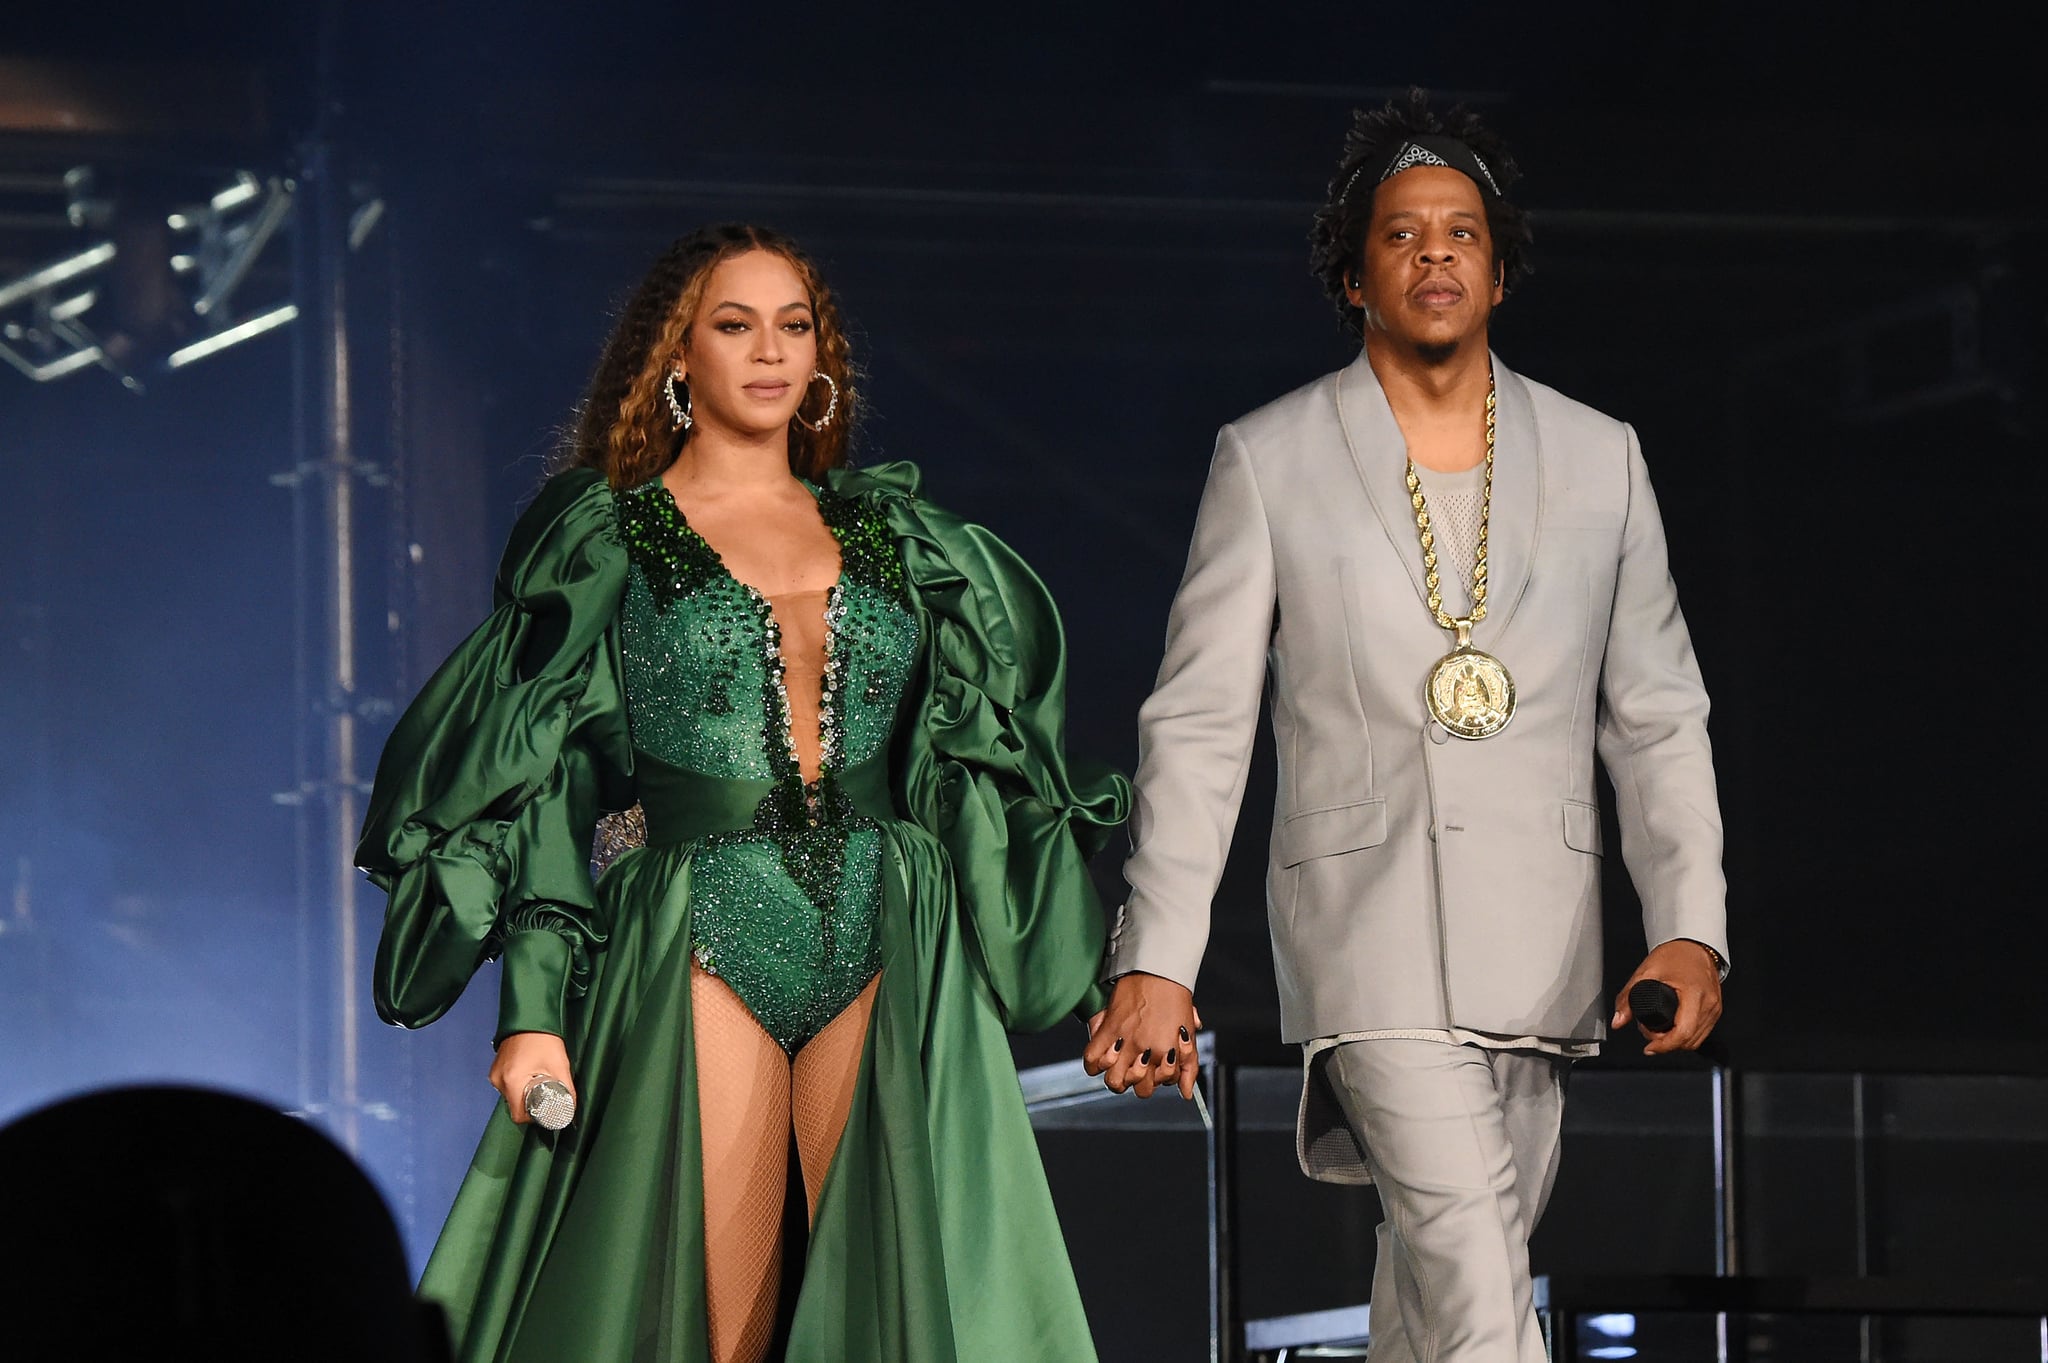 JOHANNESBURG, SOUTH AFRICA - DECEMBER 02: Beyonce and Jay-Z perform during the Global Citizen Festival: Mandela 100 at FNB Stadium on December 2, 2018 in Johannesburg, South Africa.  (Photo by Kevin Mazur/Getty Images for Global Citizen Festival: Mandela 100)